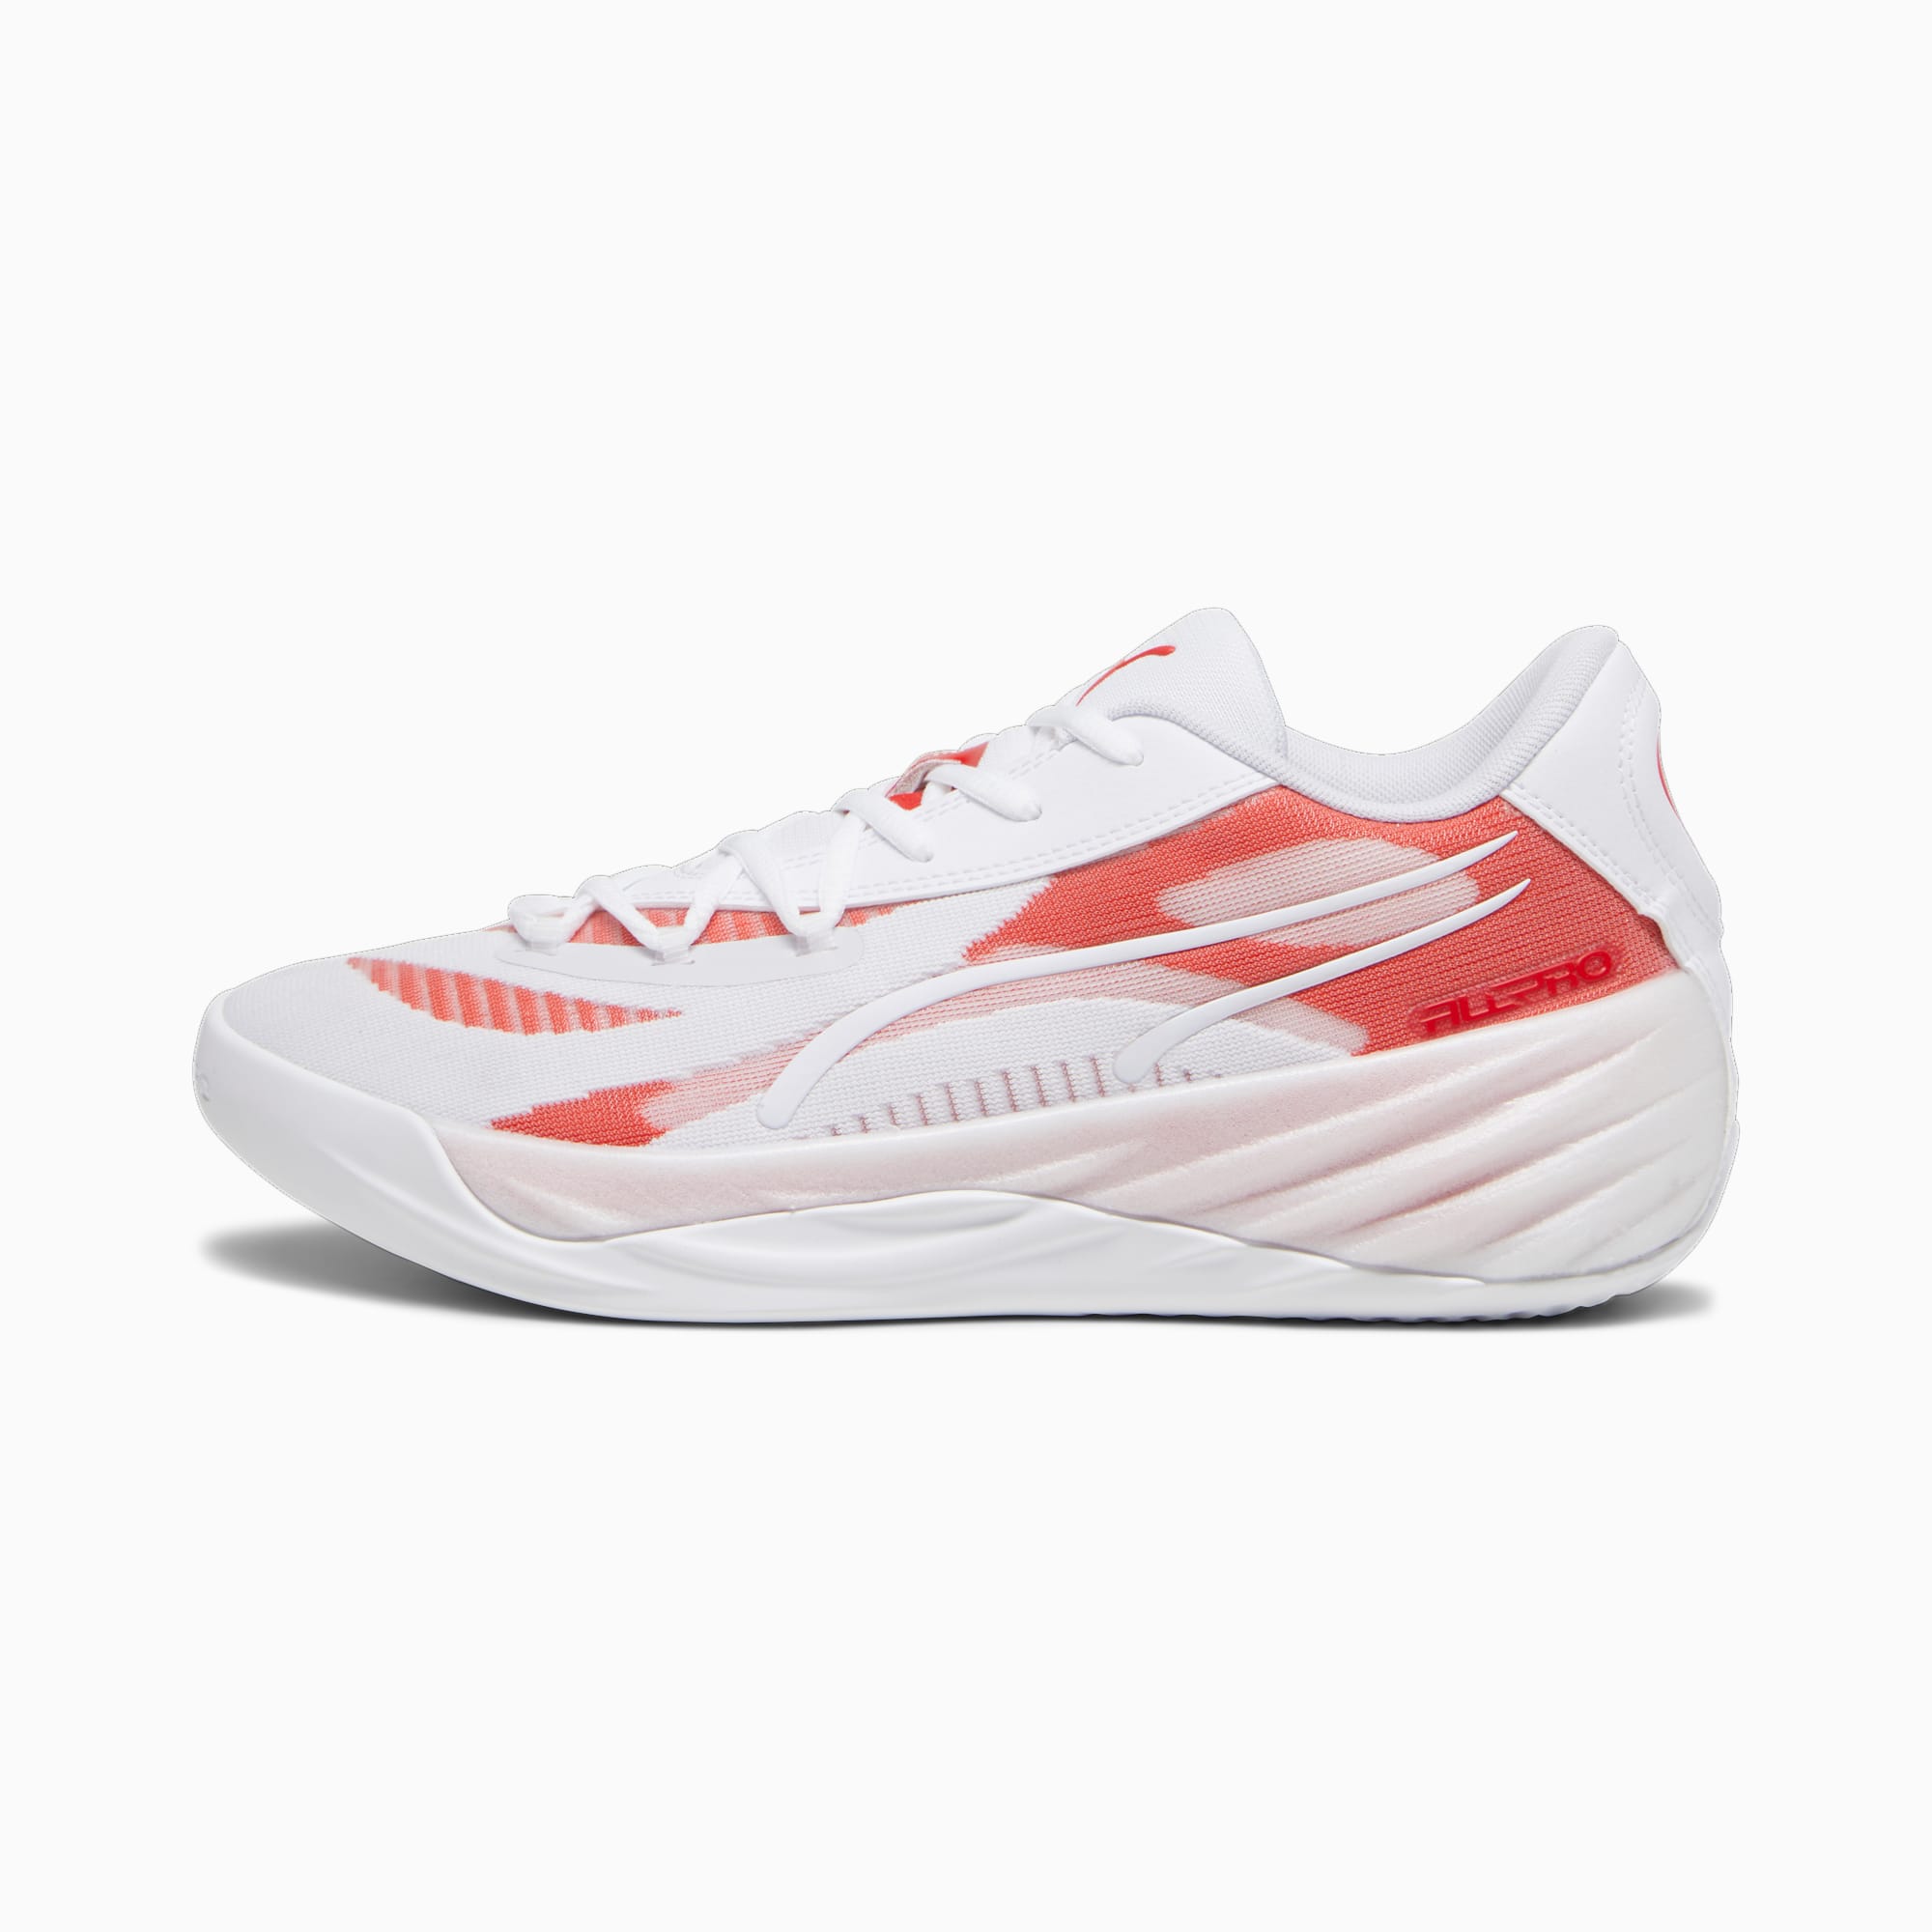 All-Pro NITRO Team Basketball Shoes | PUMA White-For All Time Red ...